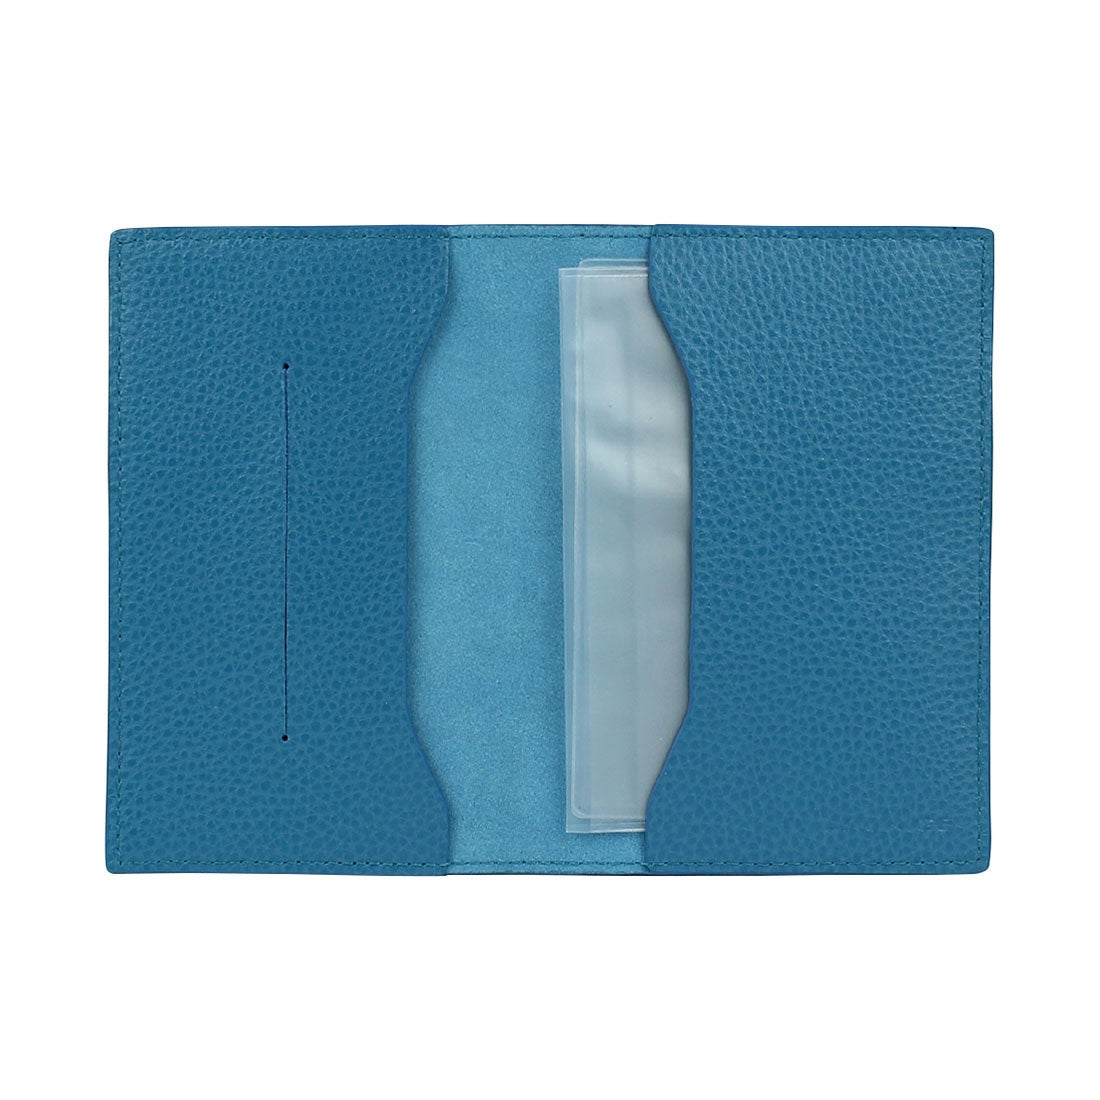 Passport/Document Holder - Turquoise#color_laurige-turquoise